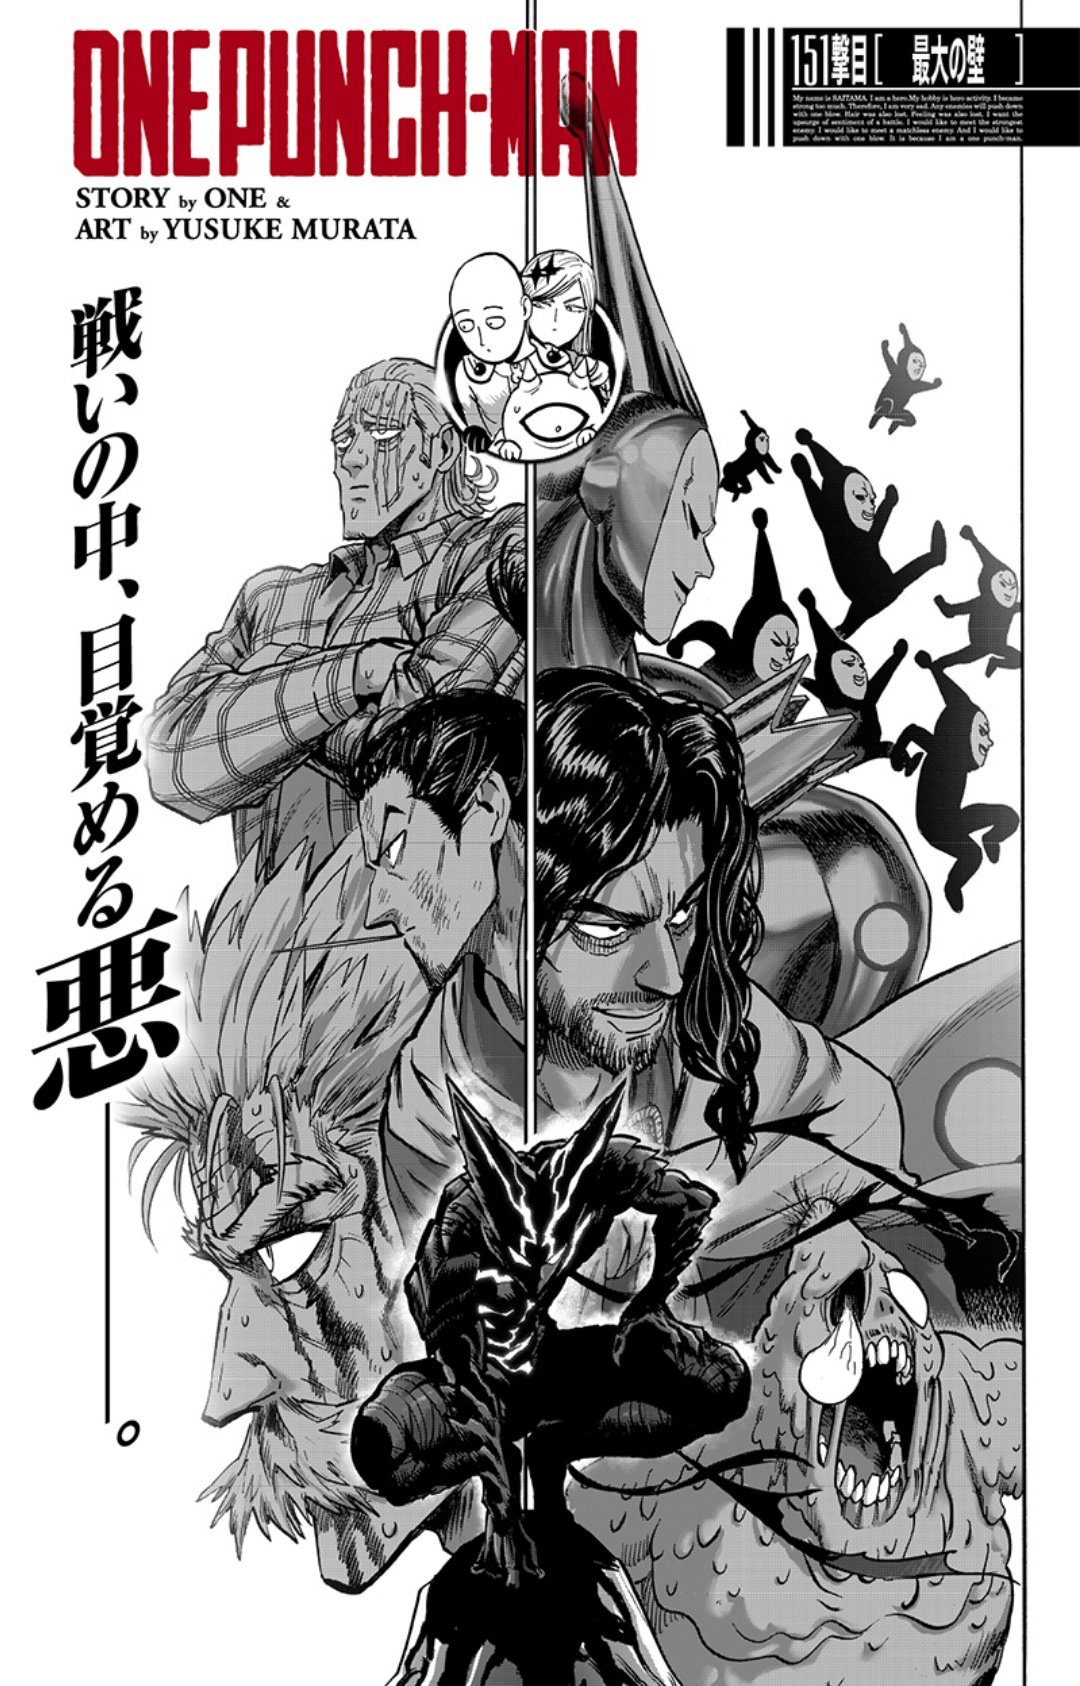 Murata Art on X: One punch man - new chapter